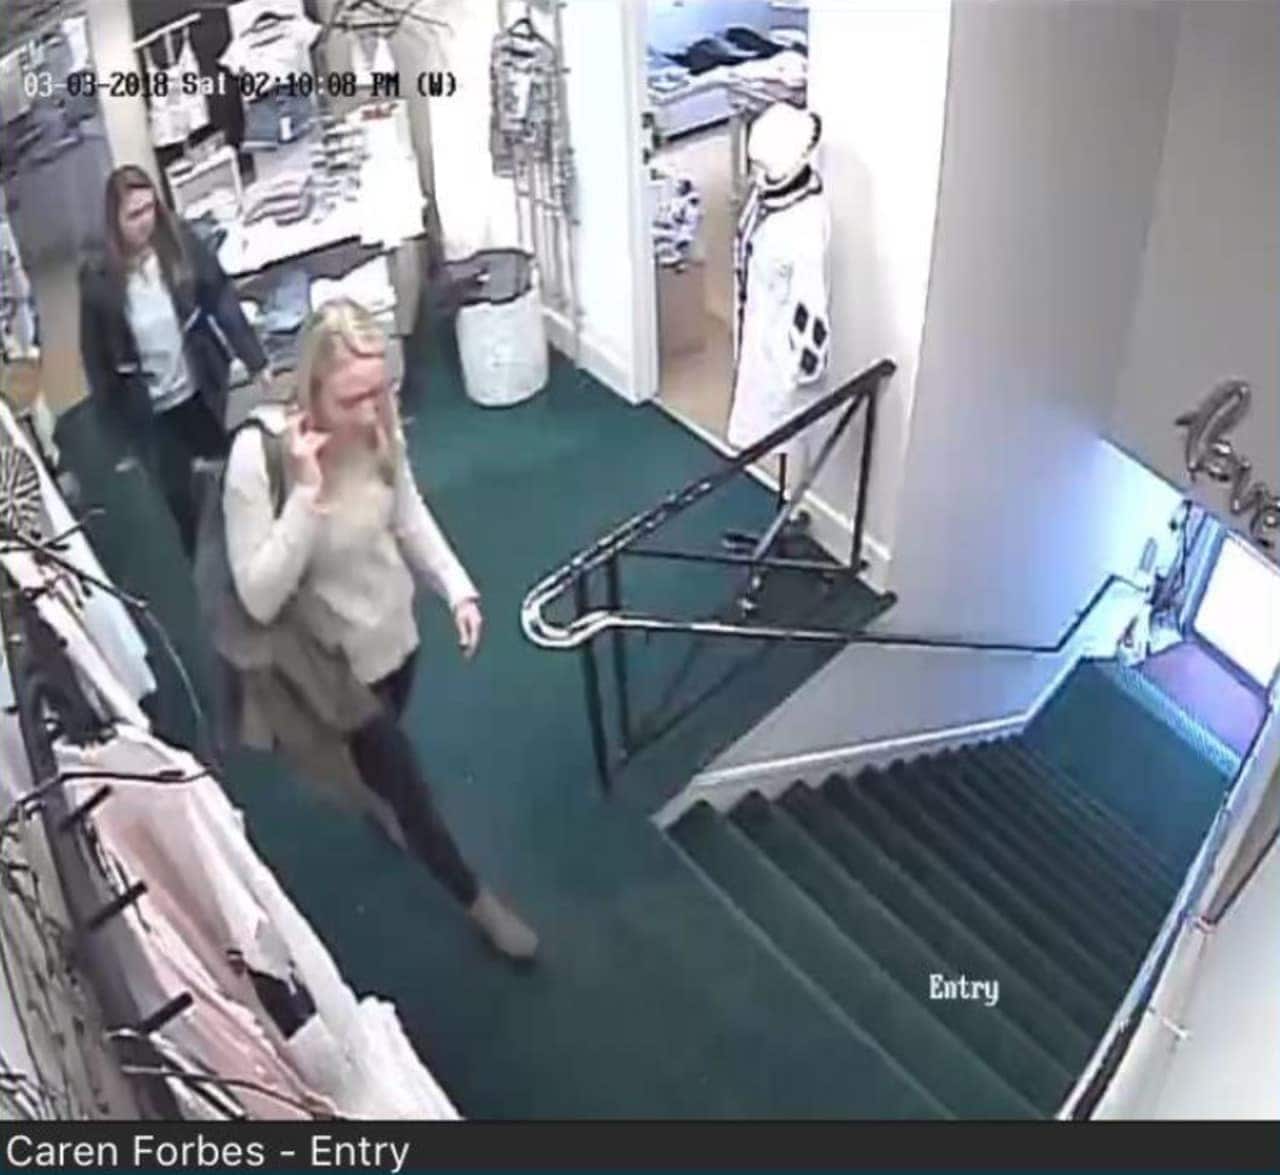 Two women suspected of stealing from a New Canaan retail store were caught on camera.